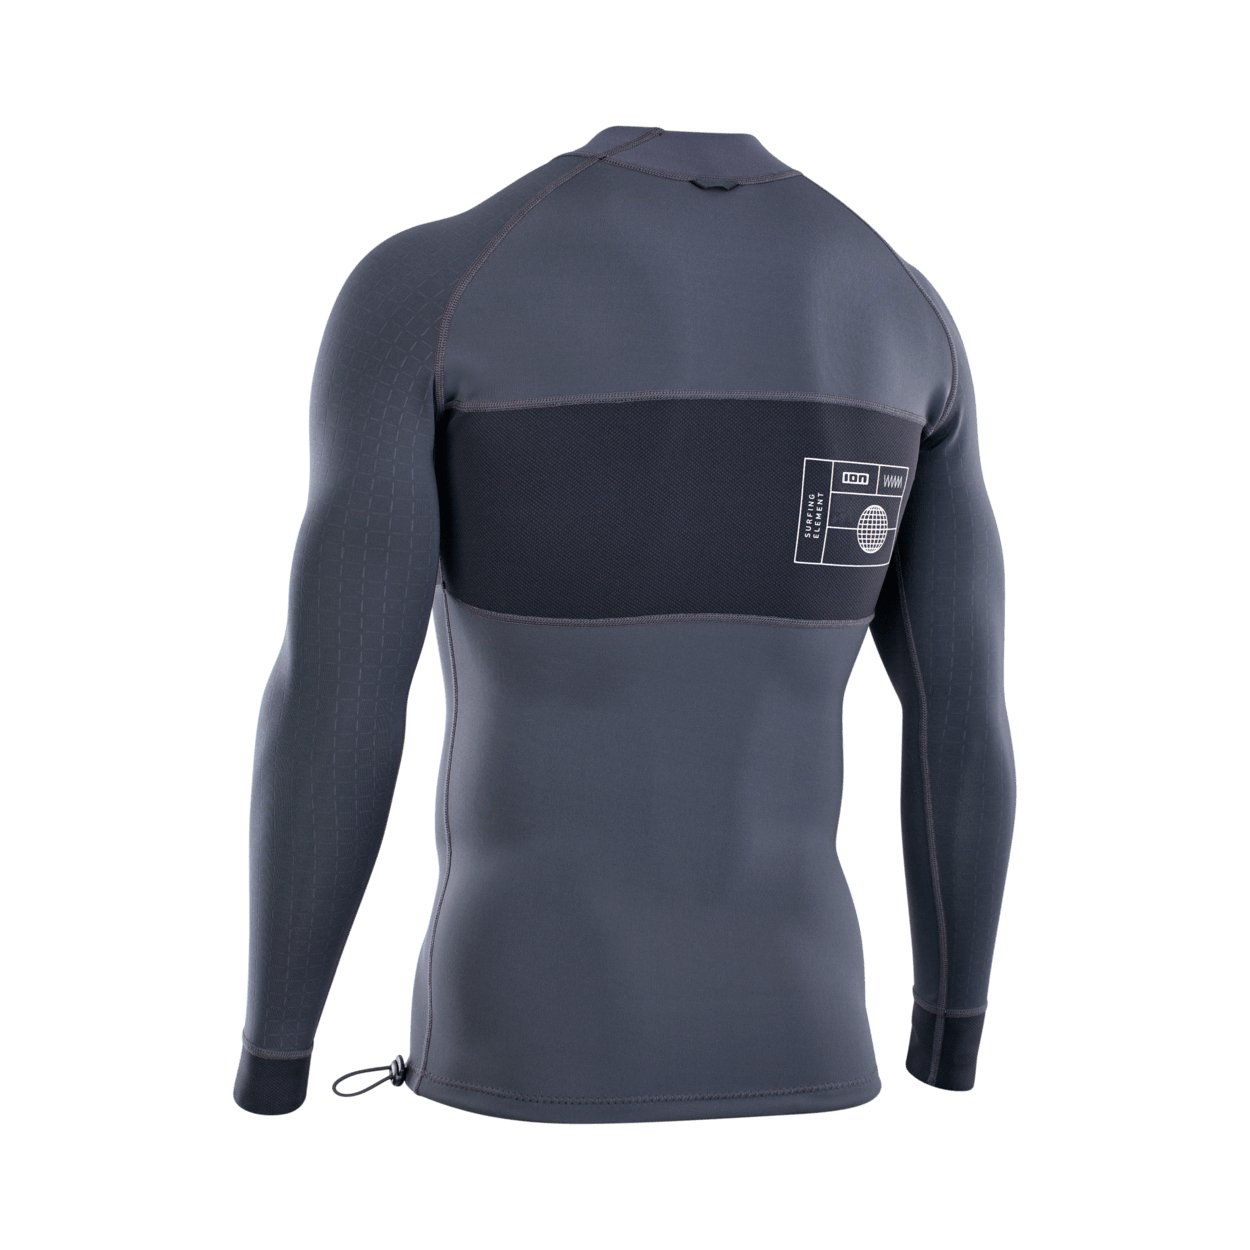 ION Neo Top 0.5 LS men 2022 - Worthing Watersports - 9010583058900 - Tops - ION Water